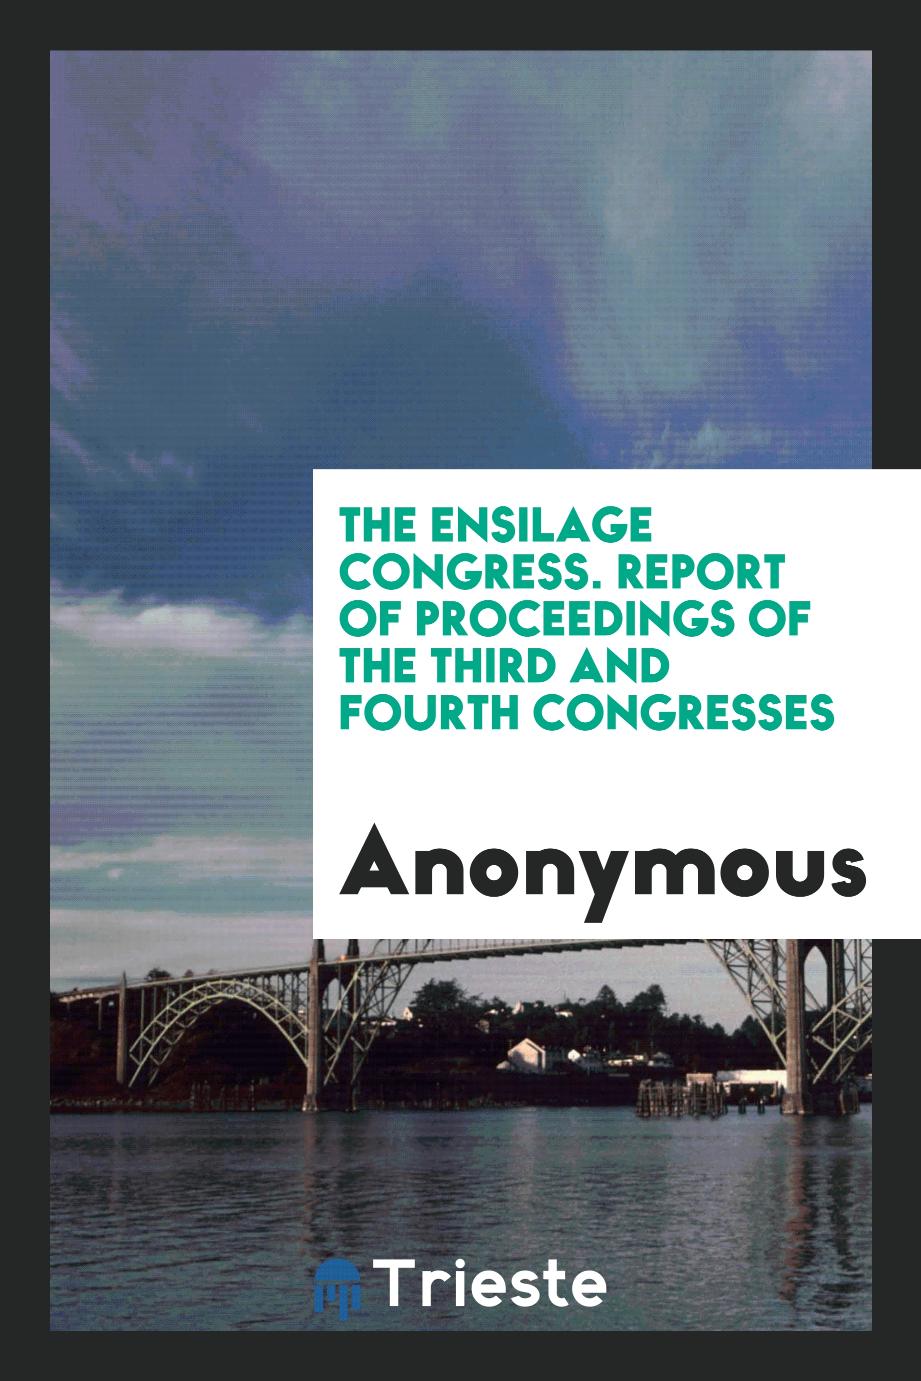 The Ensilage Congress. Report of Proceedings of the Third and Fourth Congresses